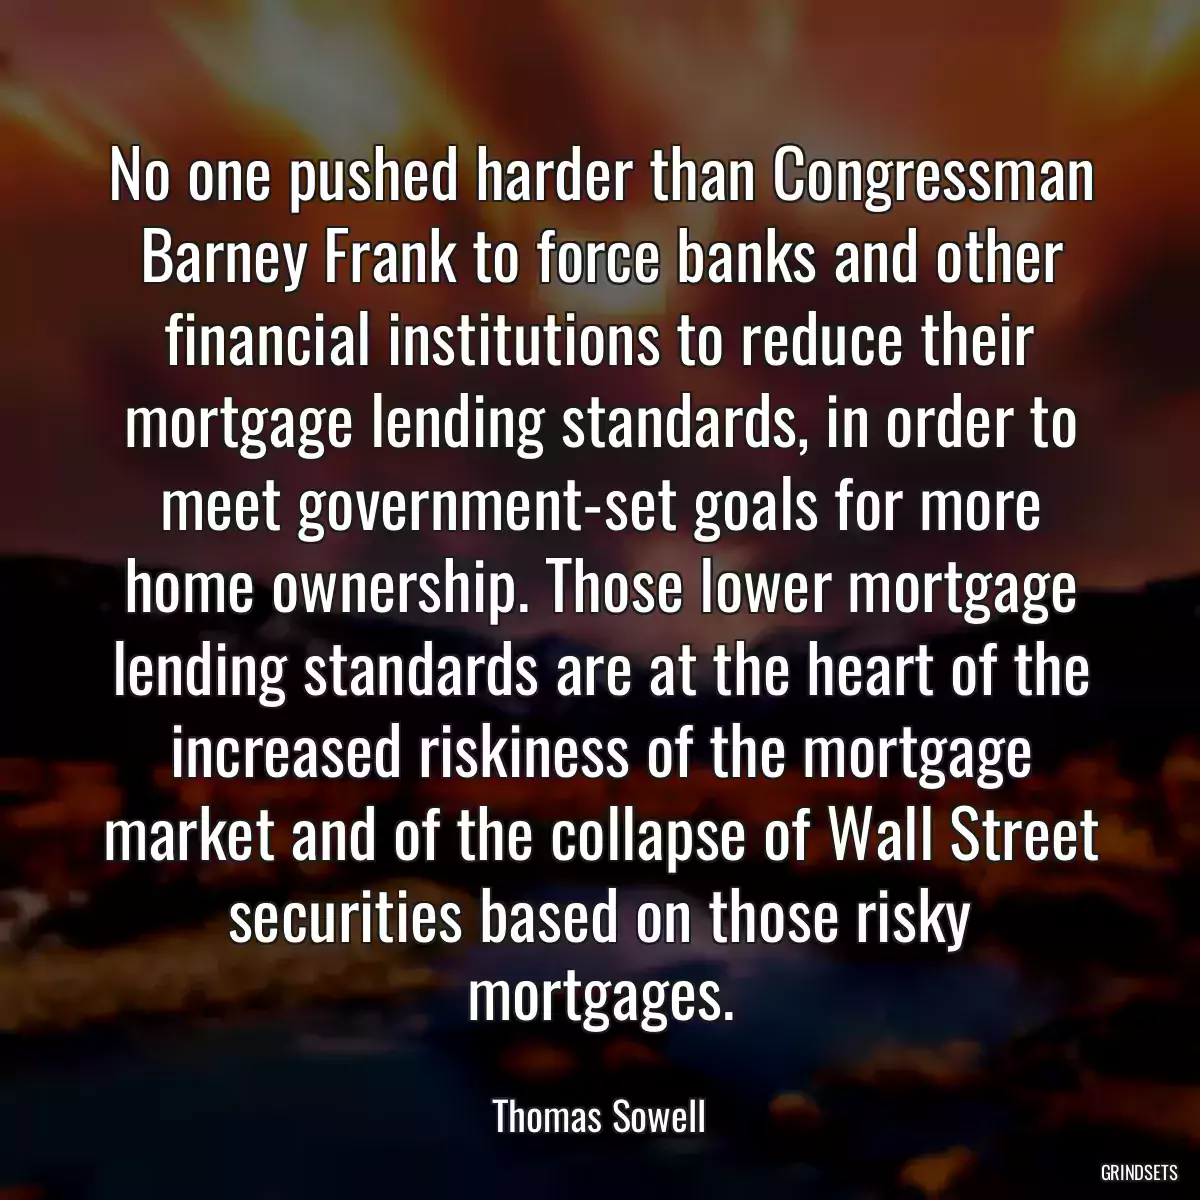 No one pushed harder than Congressman Barney Frank to force banks and other financial institutions to reduce their mortgage lending standards, in order to meet government-set goals for more home ownership. Those lower mortgage lending standards are at the heart of the increased riskiness of the mortgage market and of the collapse of Wall Street securities based on those risky mortgages.